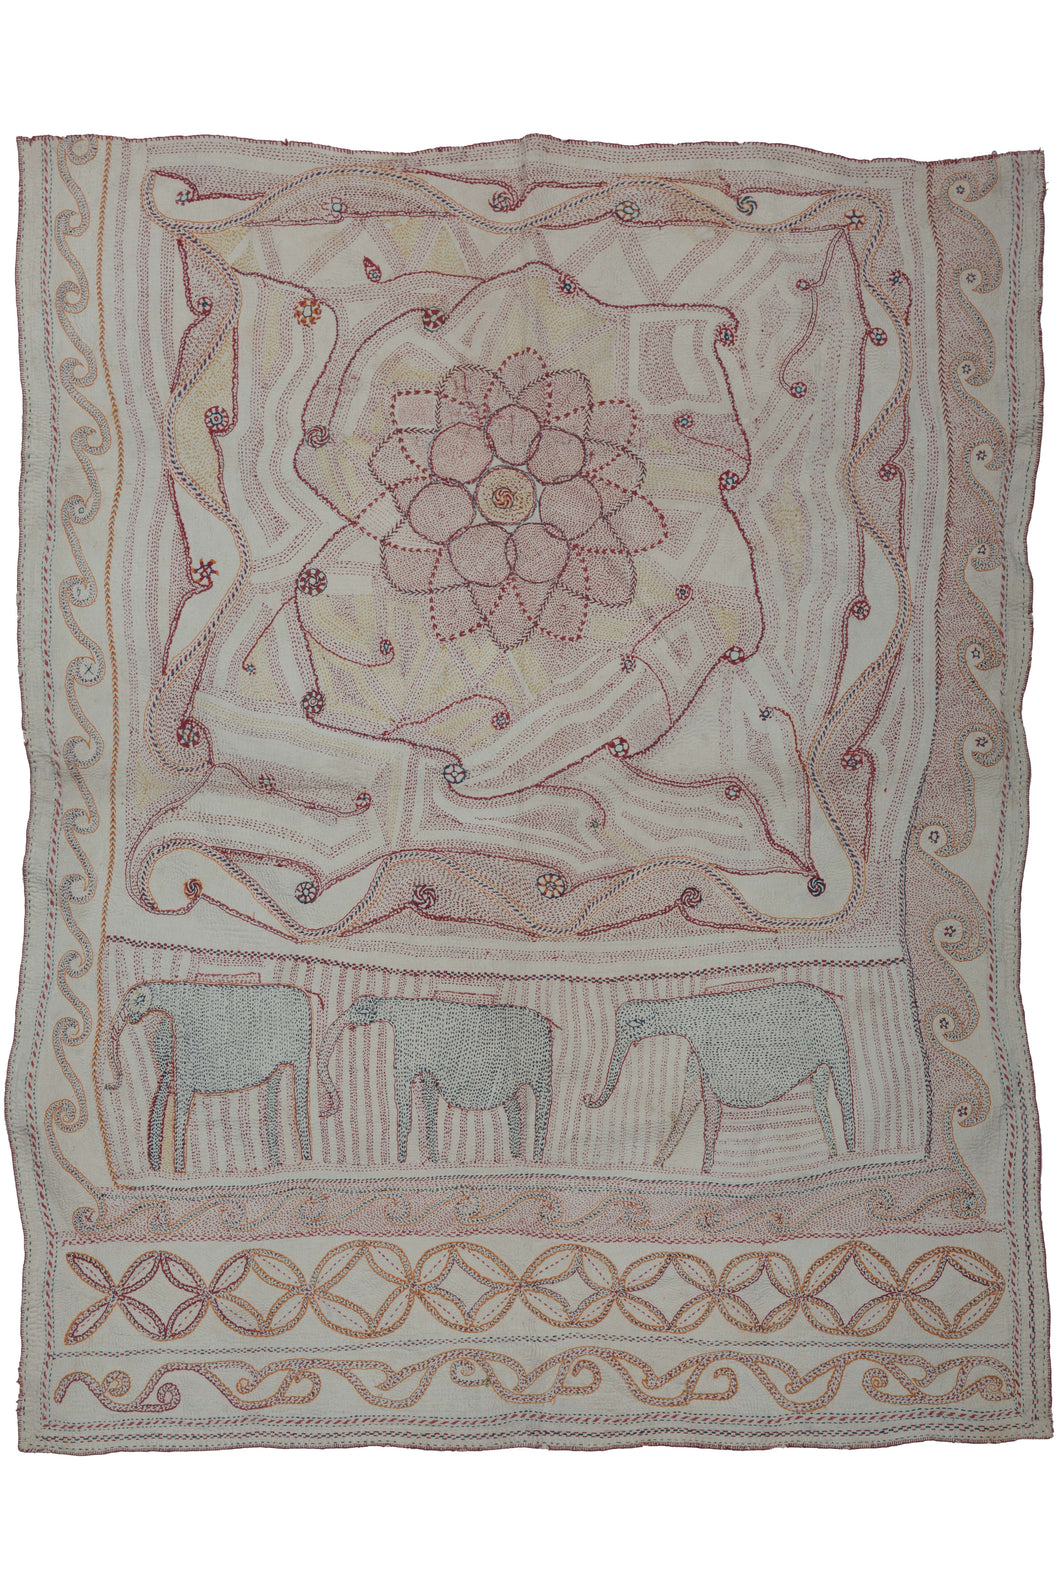 This Three Elephant Kantha features a main panel with a central flower surrounded by organic flowering vines and free-flowing running stitches. The bottom panel has a lovely rendition of three elephants. Elephants are a very auspicious and potent symbol in local culture. They represent wisdom and strength as well as having regal and divine connotations dependent on the intention of the artisan. 